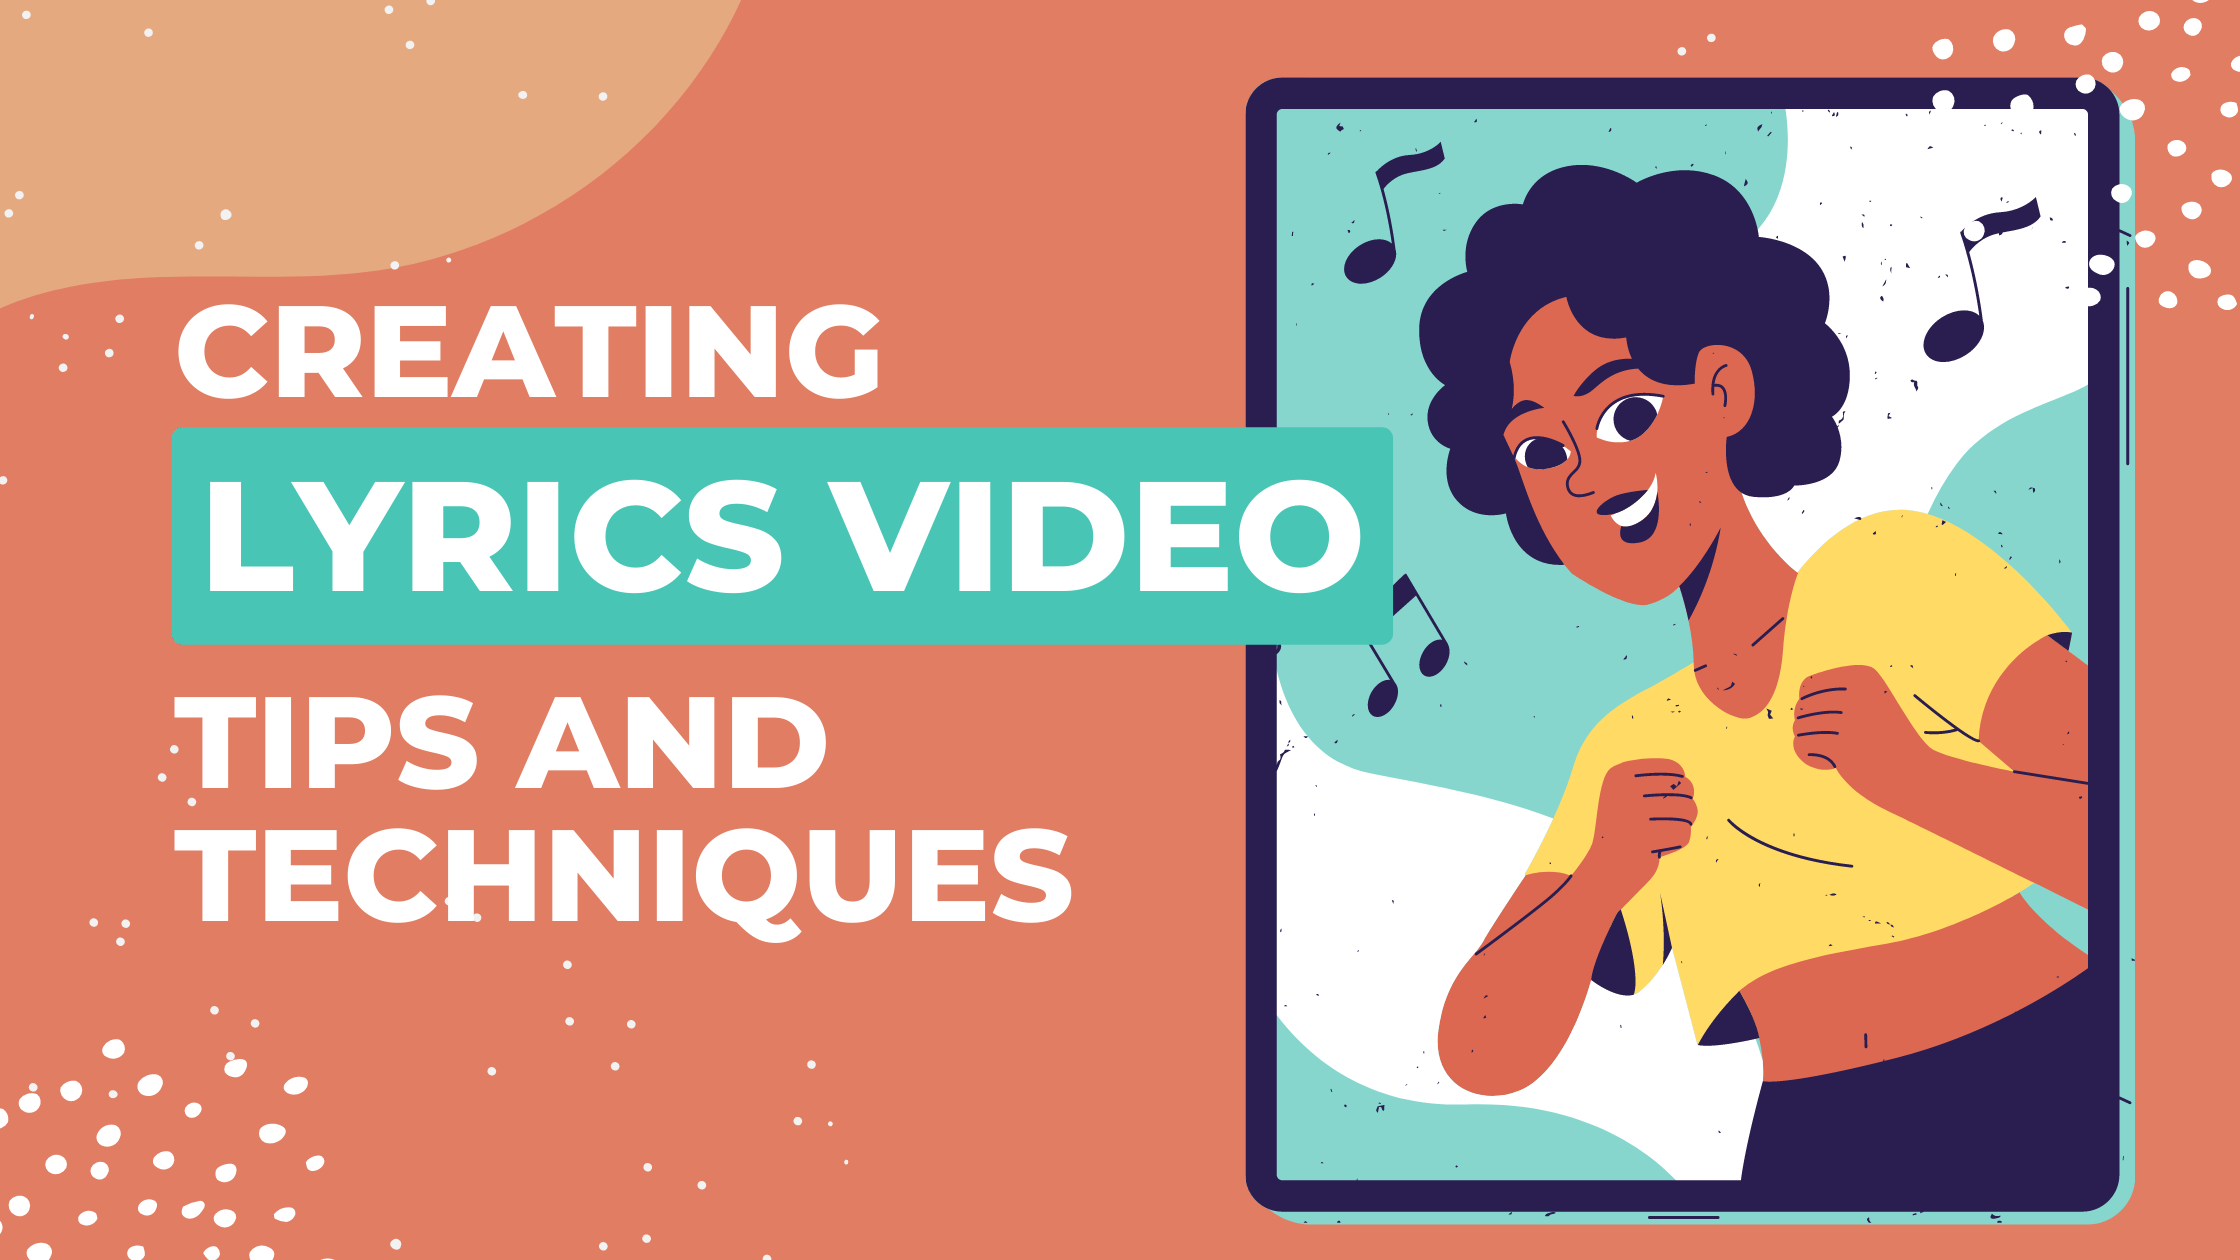 The Art of Creating Lyrics Video: Tips and Techniques for Success